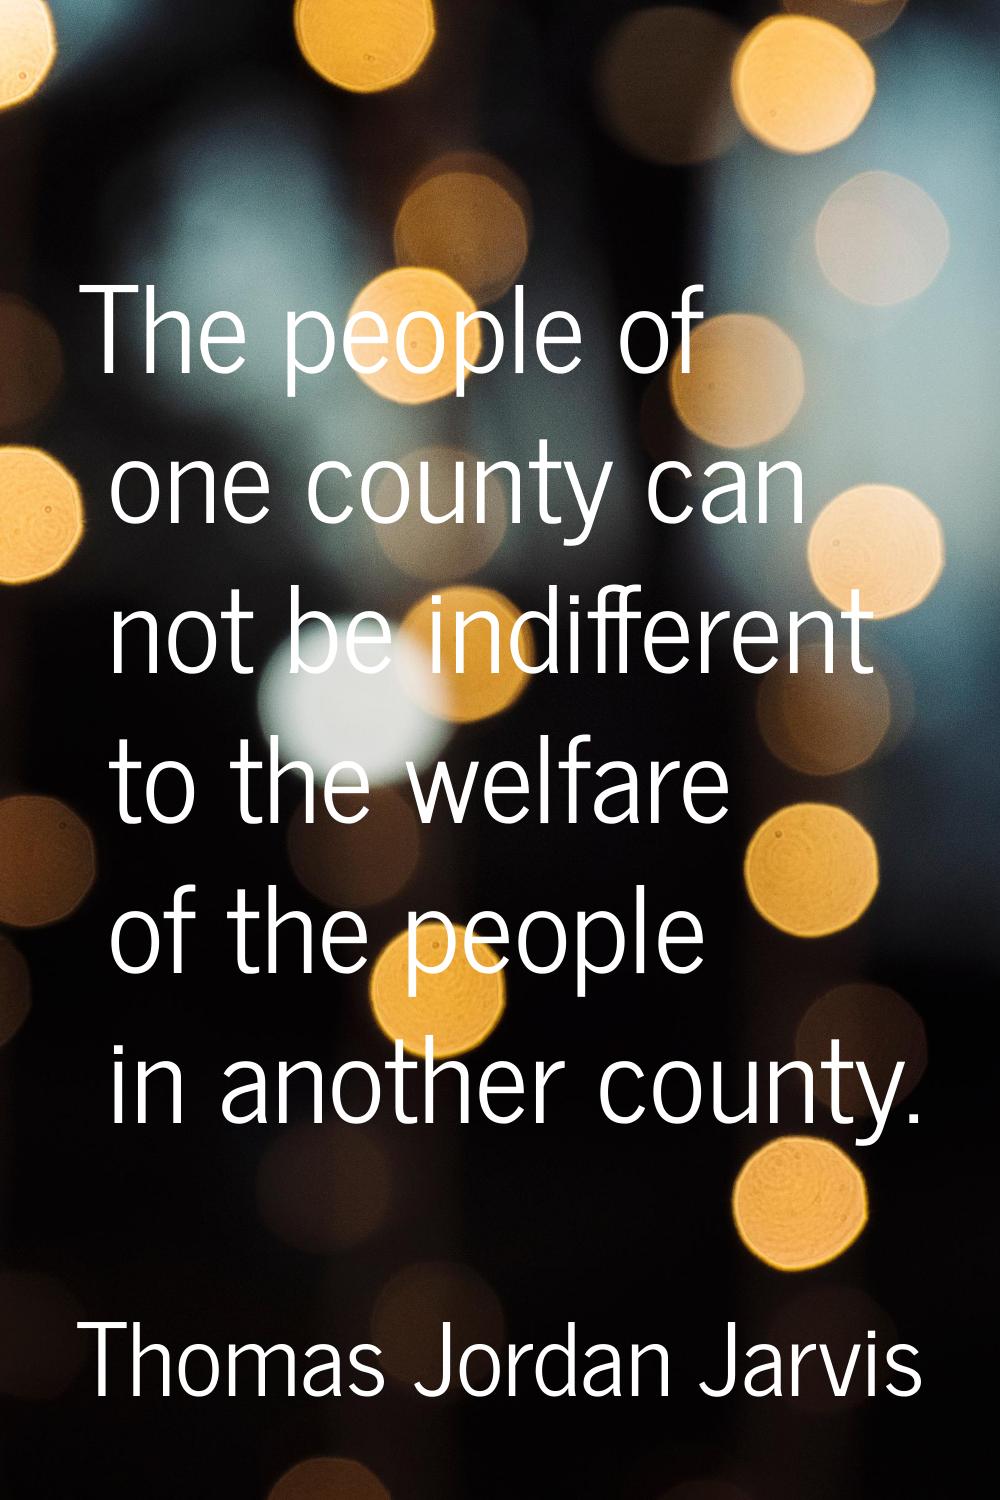 The people of one county can not be indifferent to the welfare of the people in another county.